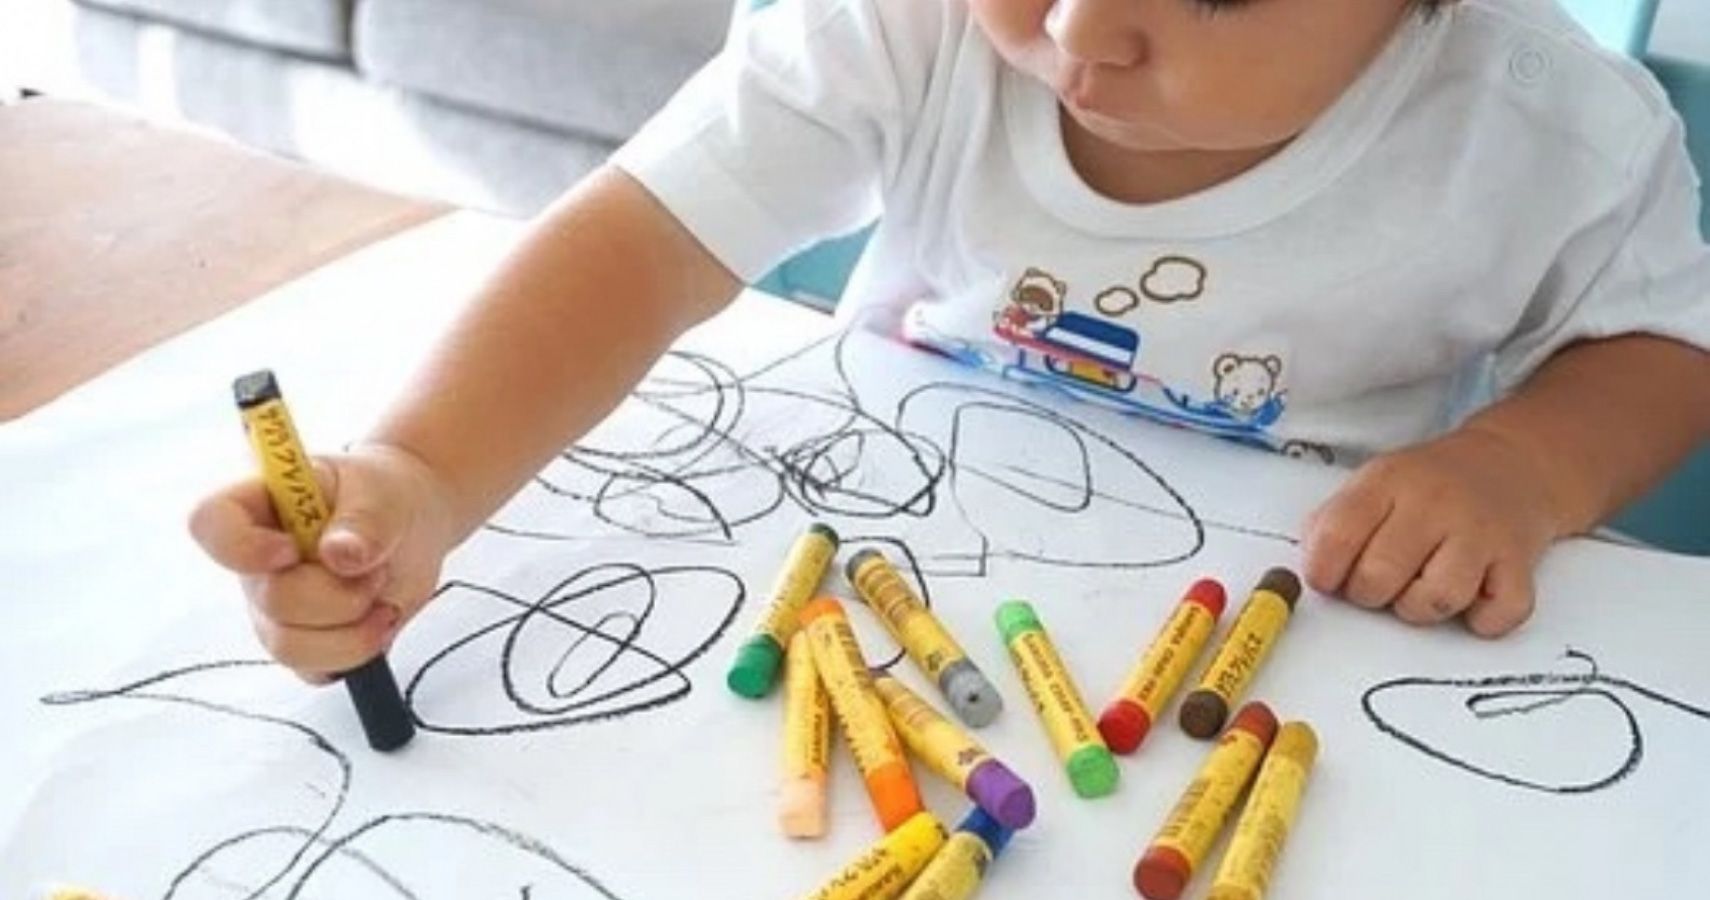 What To Do if Your Child Eats a Crayon